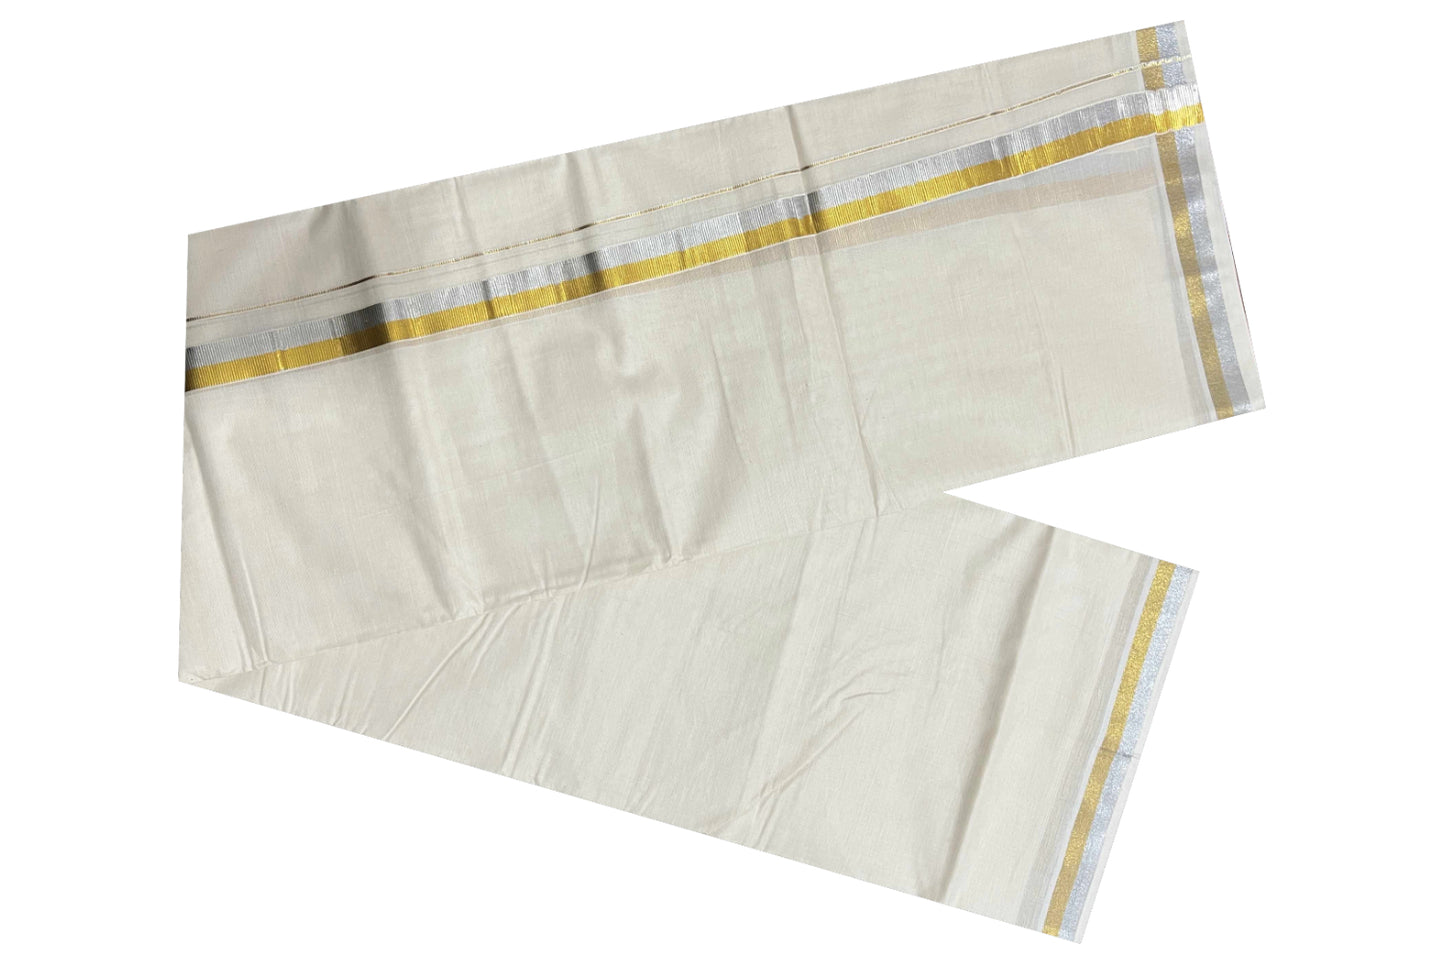 Off White Kerala Double Mundu with Silver and Golden Kasavu Border 1 inches (South Indian Kerala Dhoti)